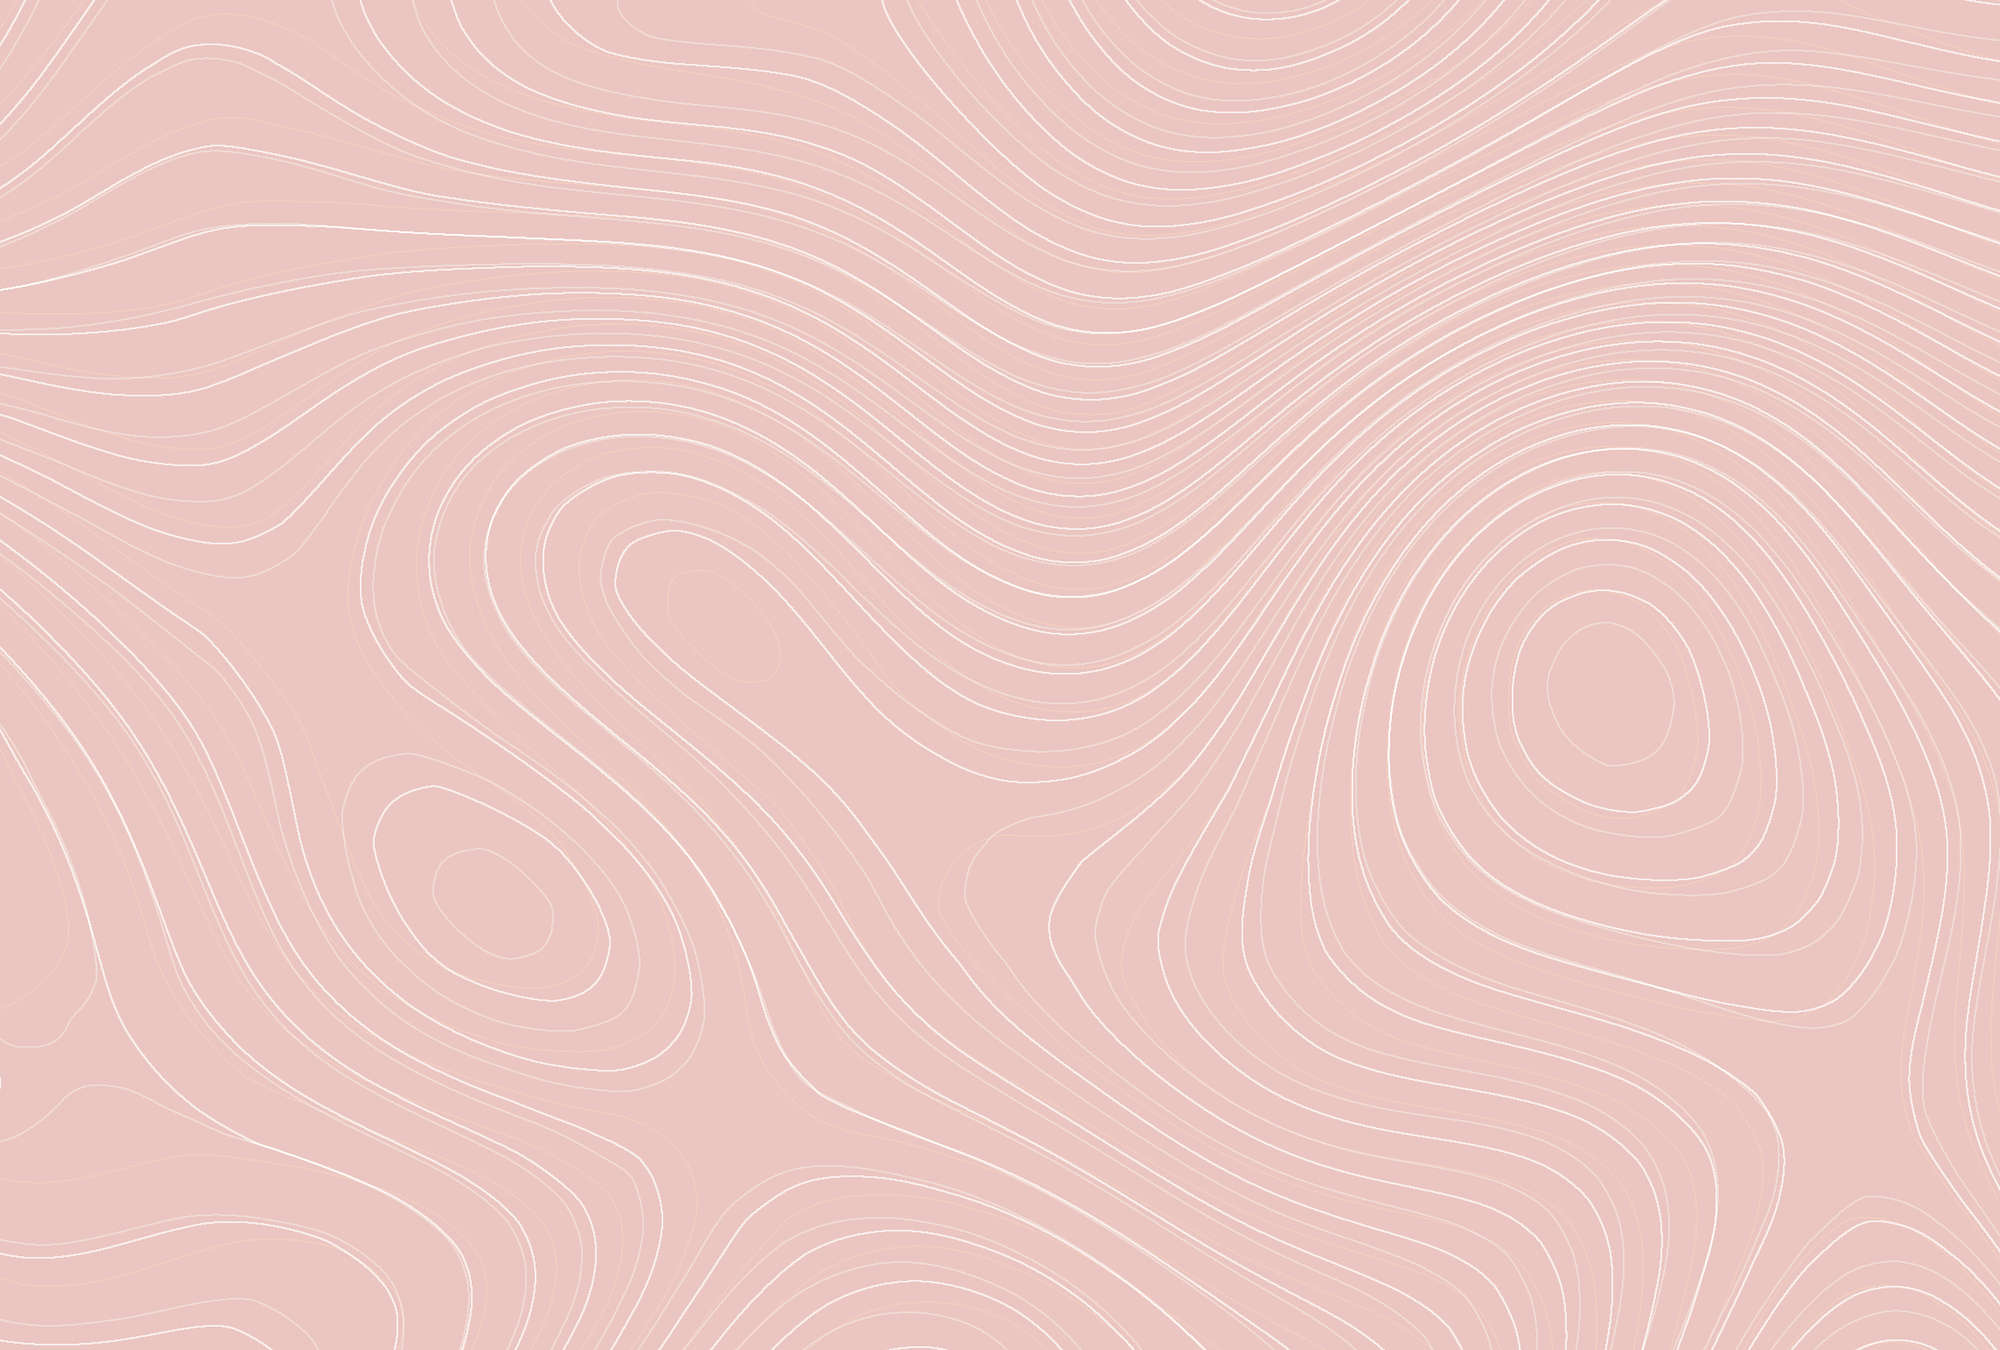             Photo wallpaper abstract lines pattern - pink, white
        